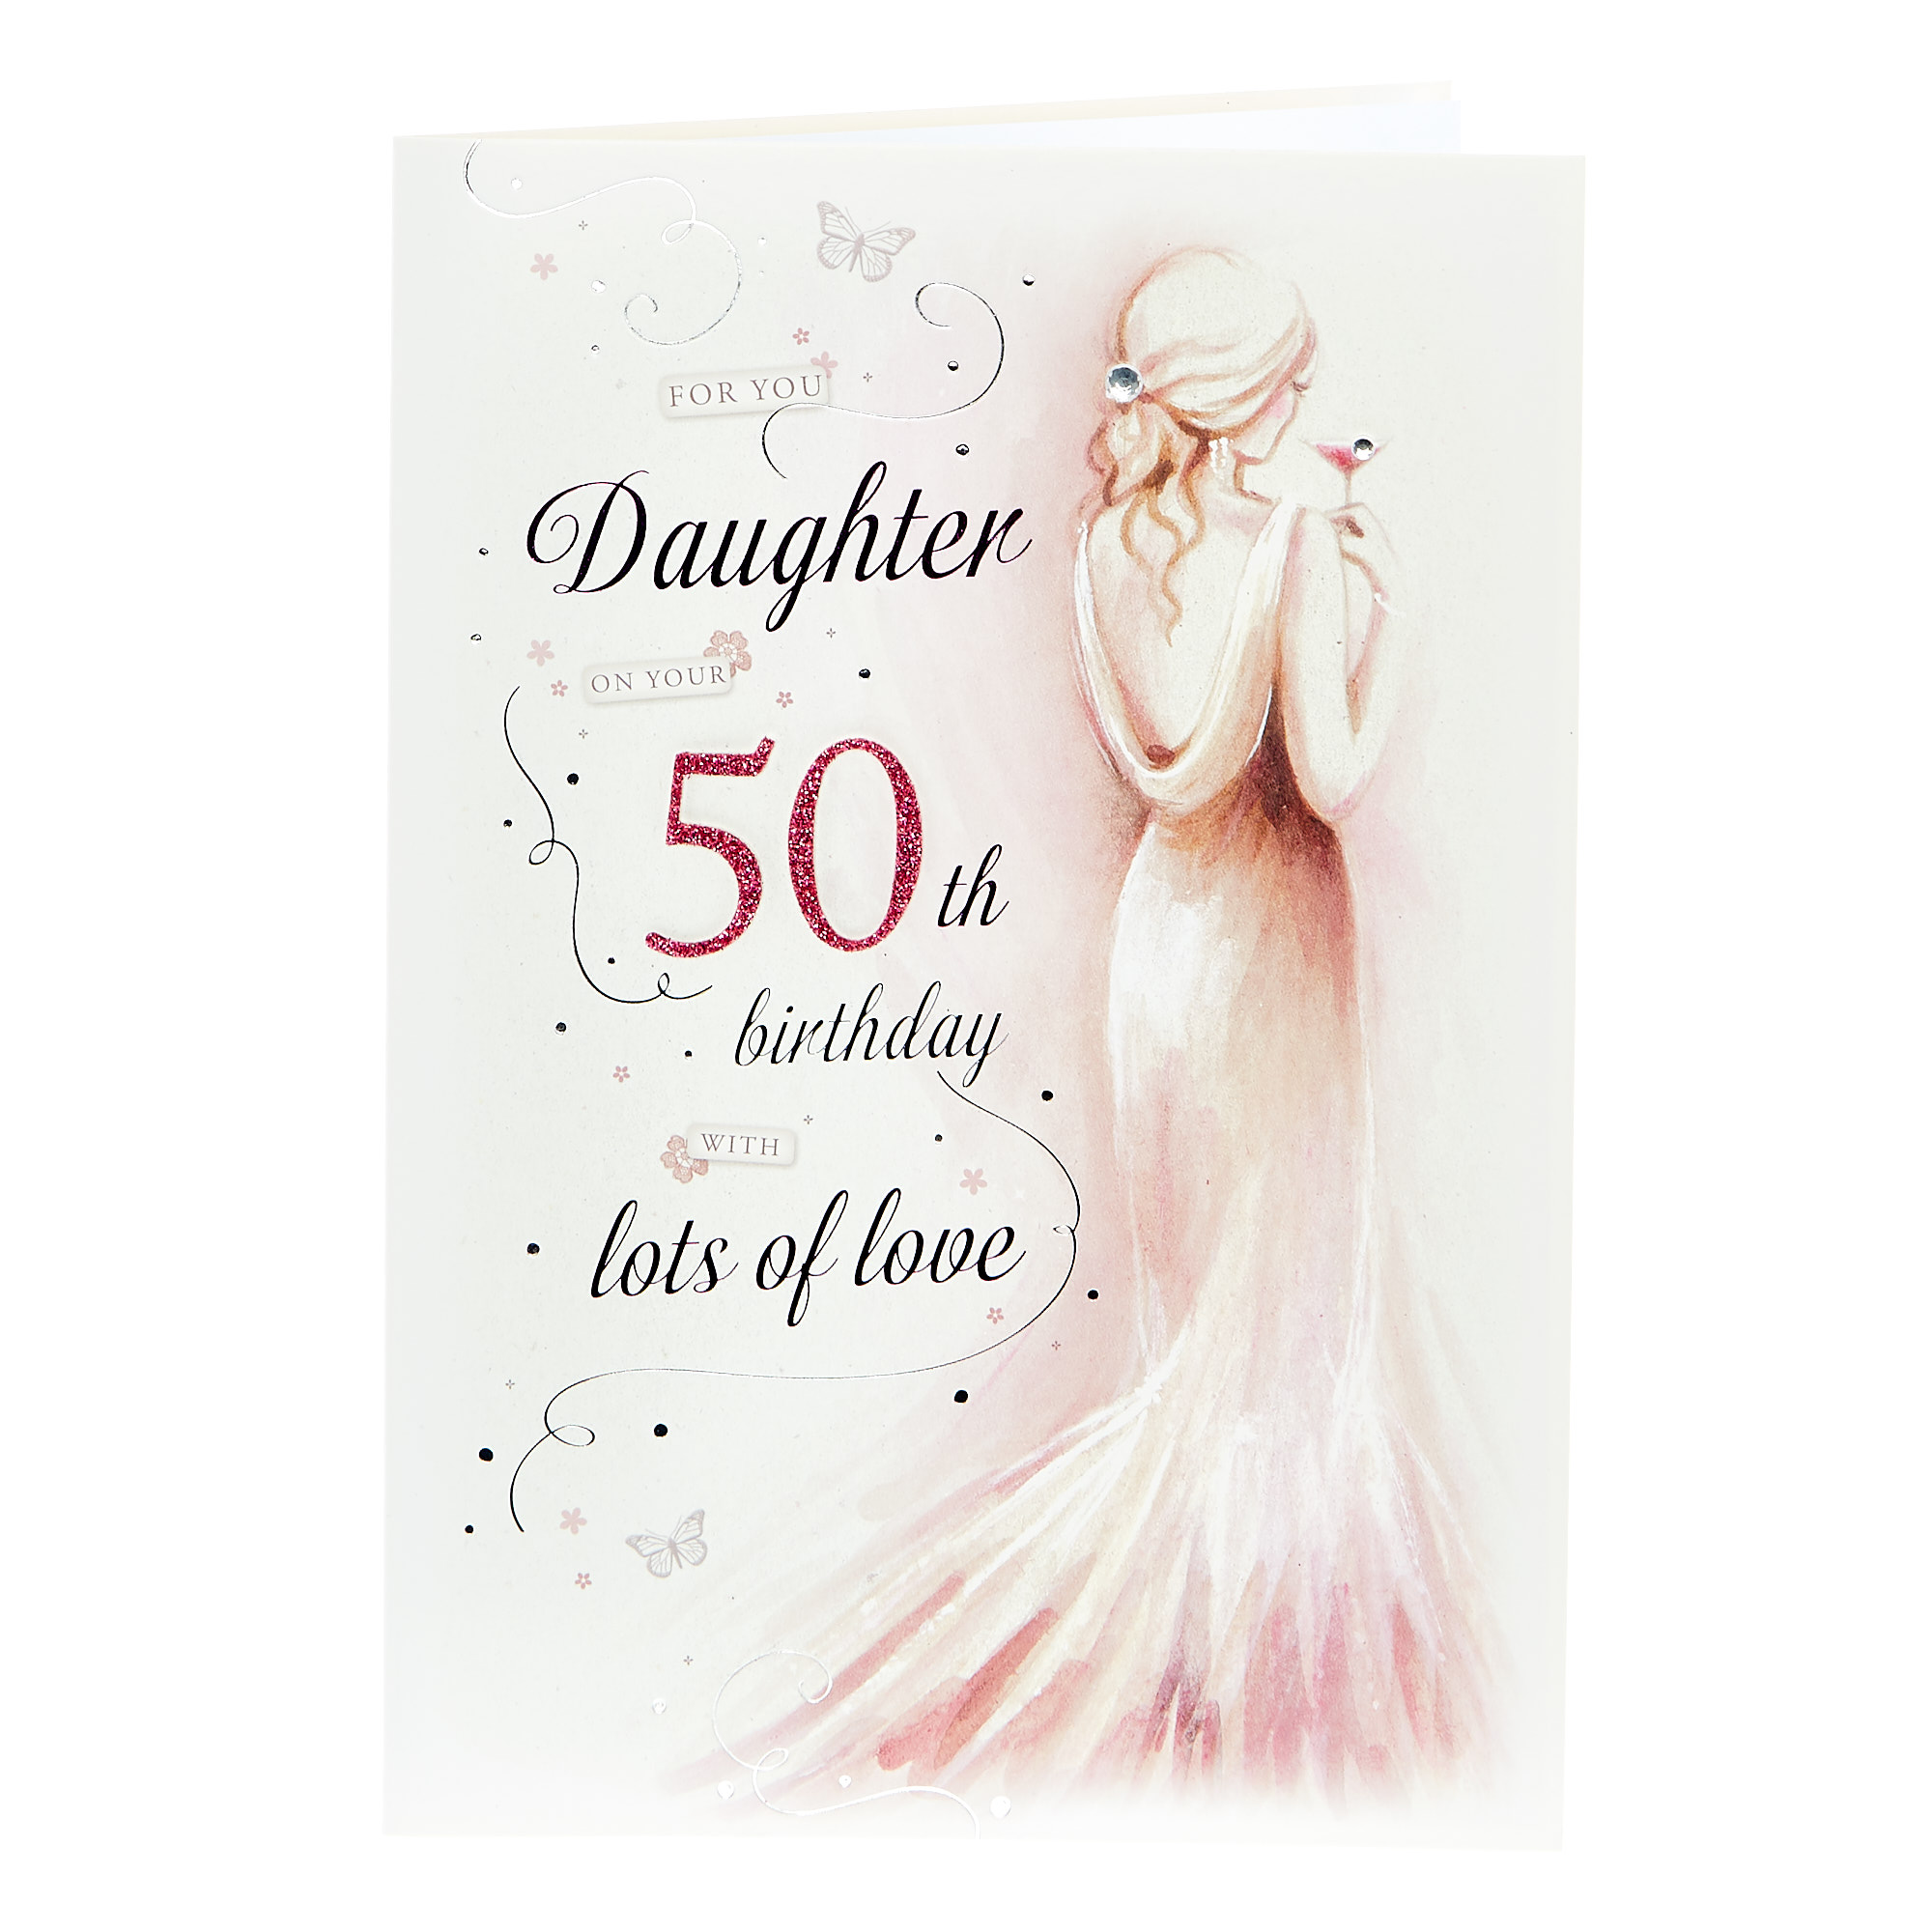 50th Birthday Card - Daughter, With Lots Of Love